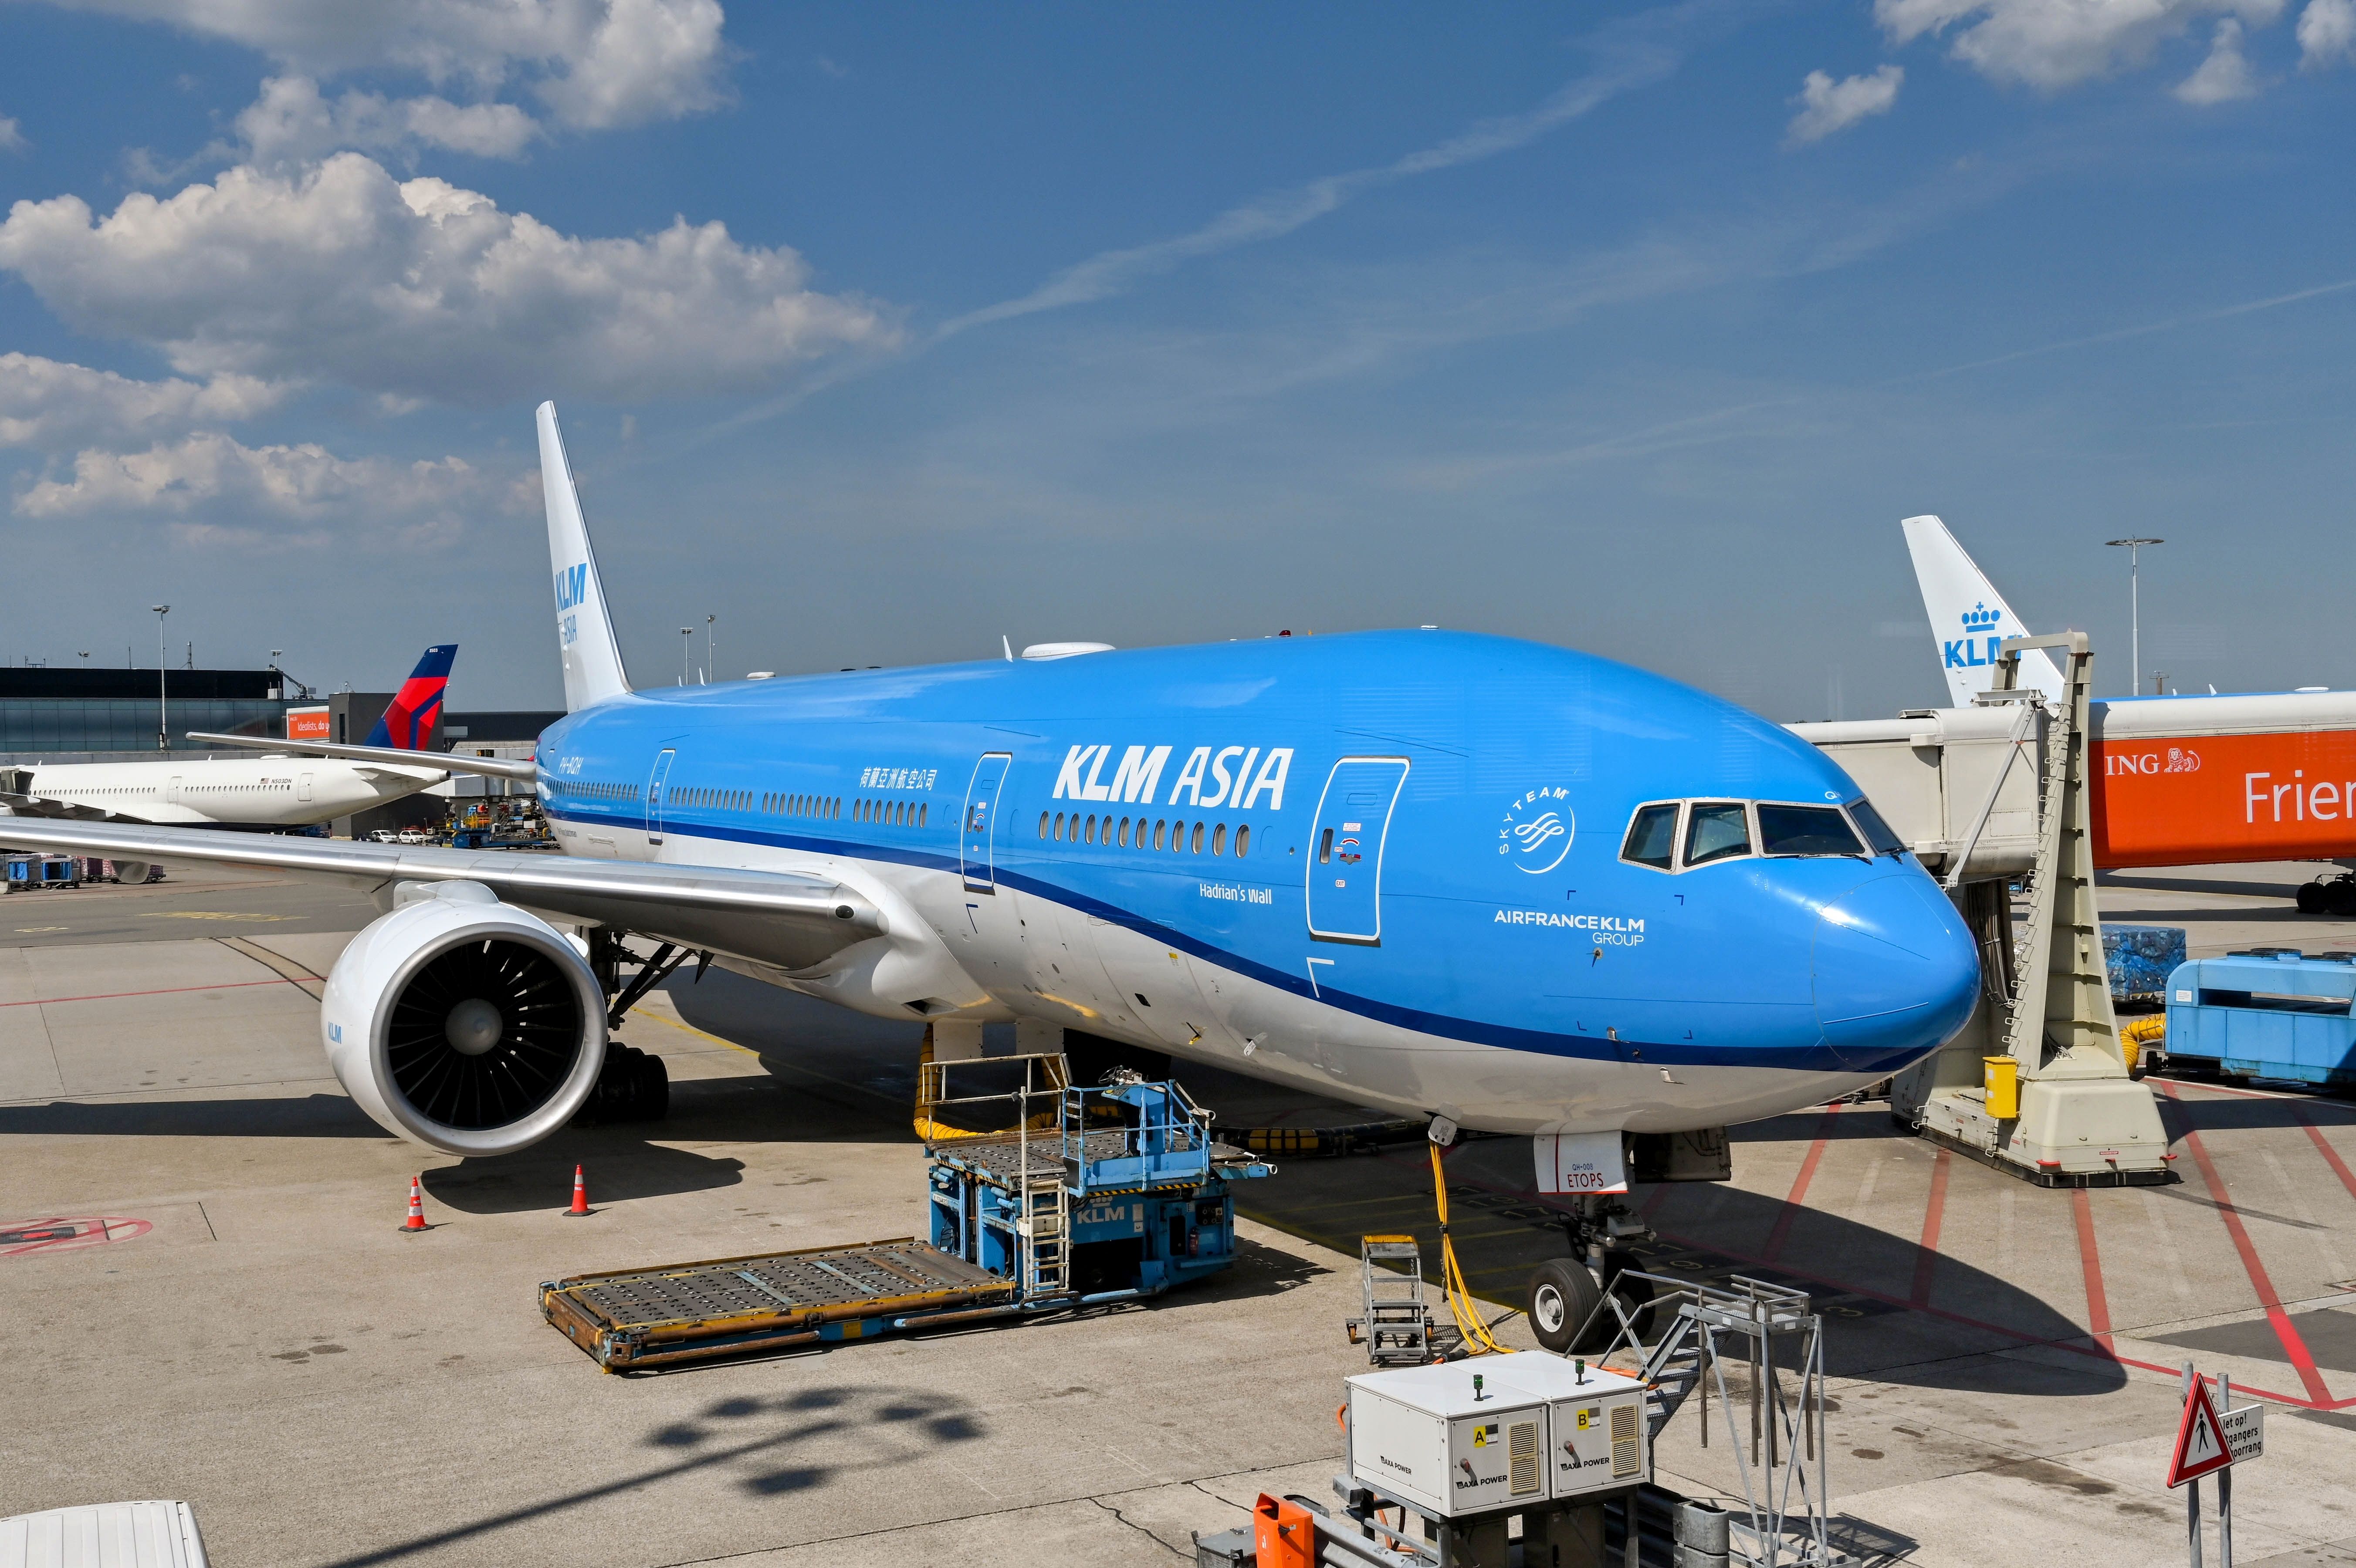 KLM Asia Boring 777 On Stand